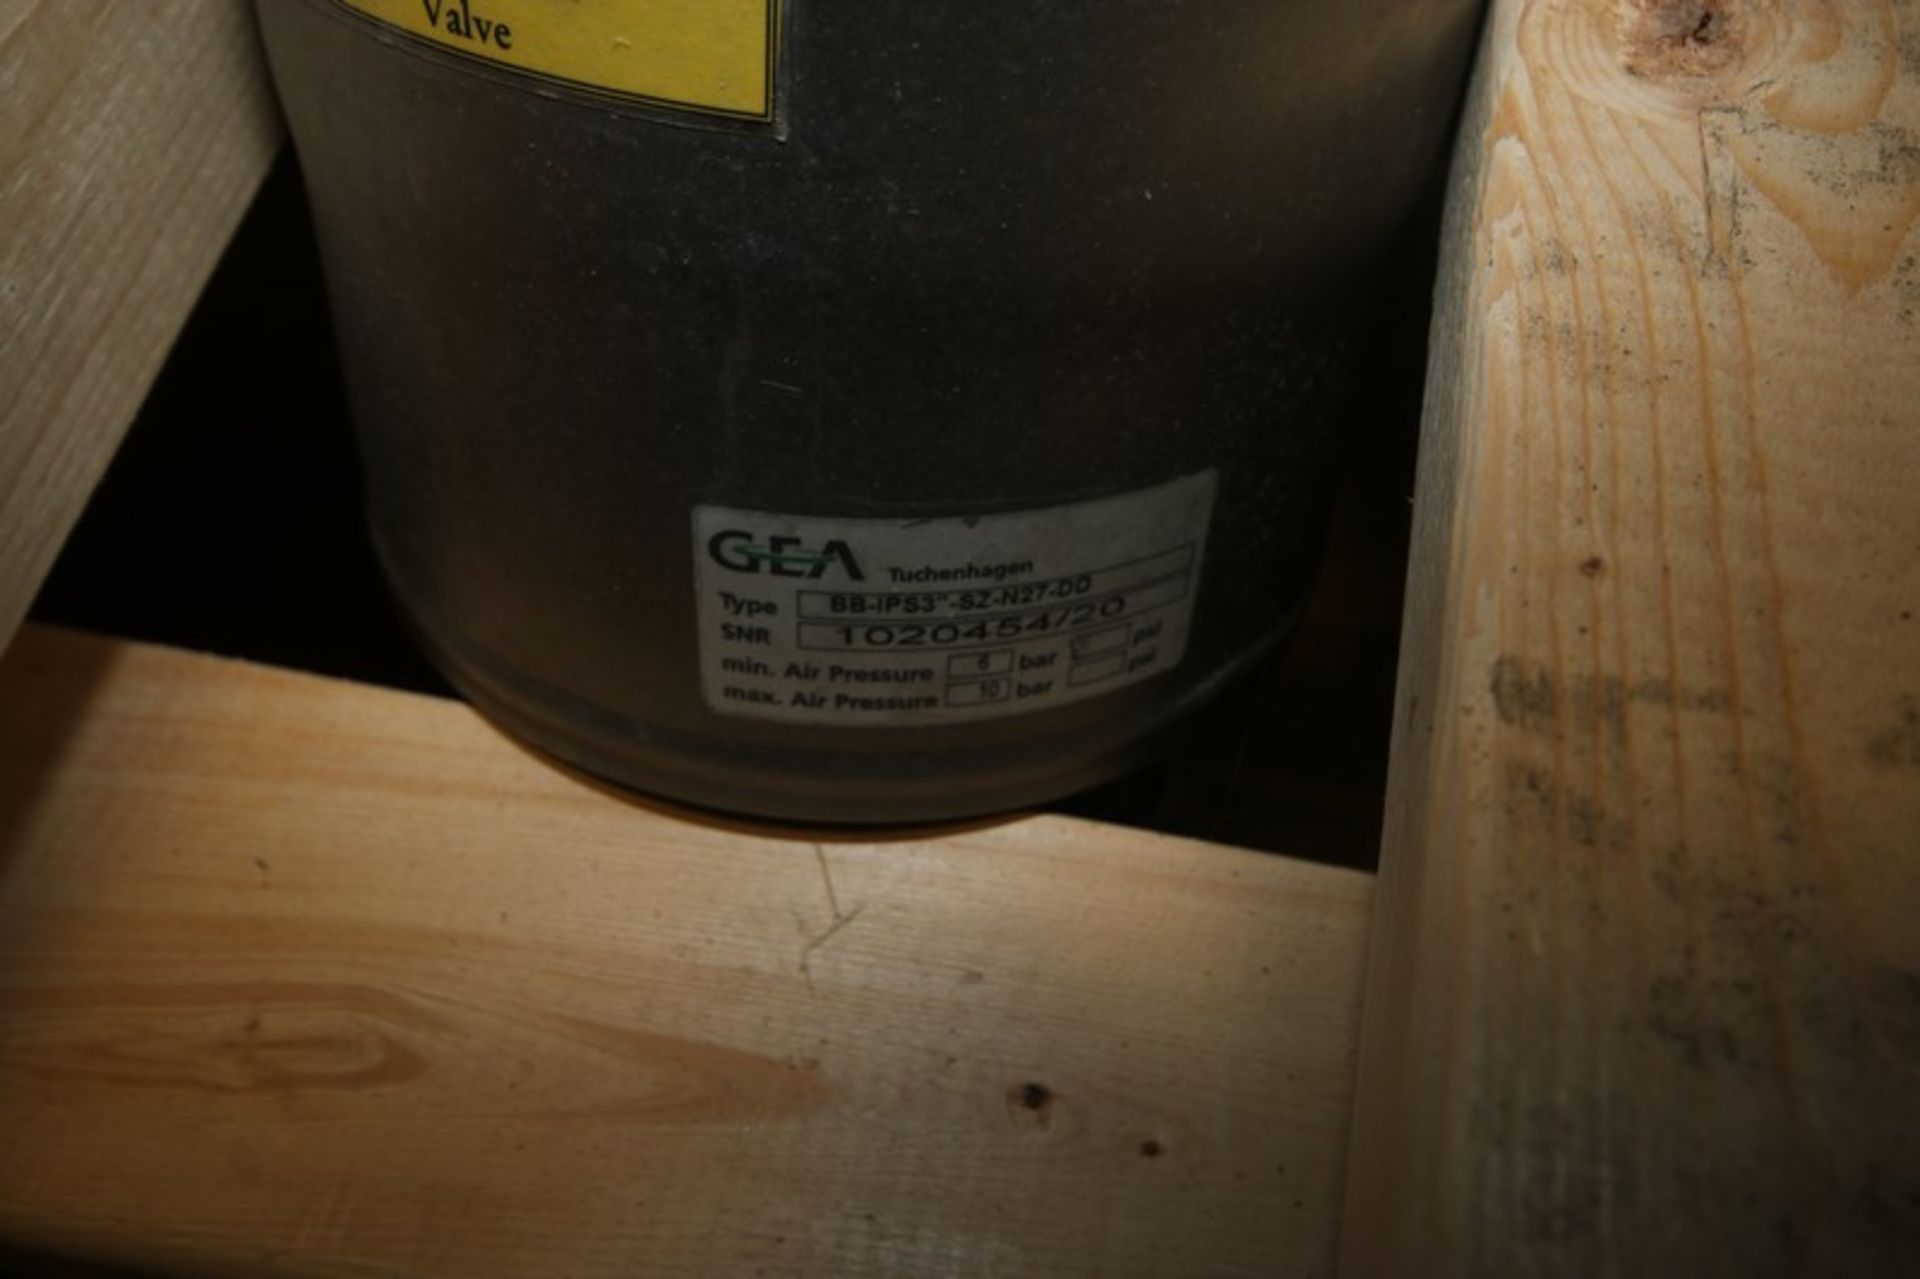 GEA Aprox. 2" S/S Air Valve ThinkTop Heads, Type: BEC-IPS6"/3"-SZ-N27-DD/CL - Image 7 of 7